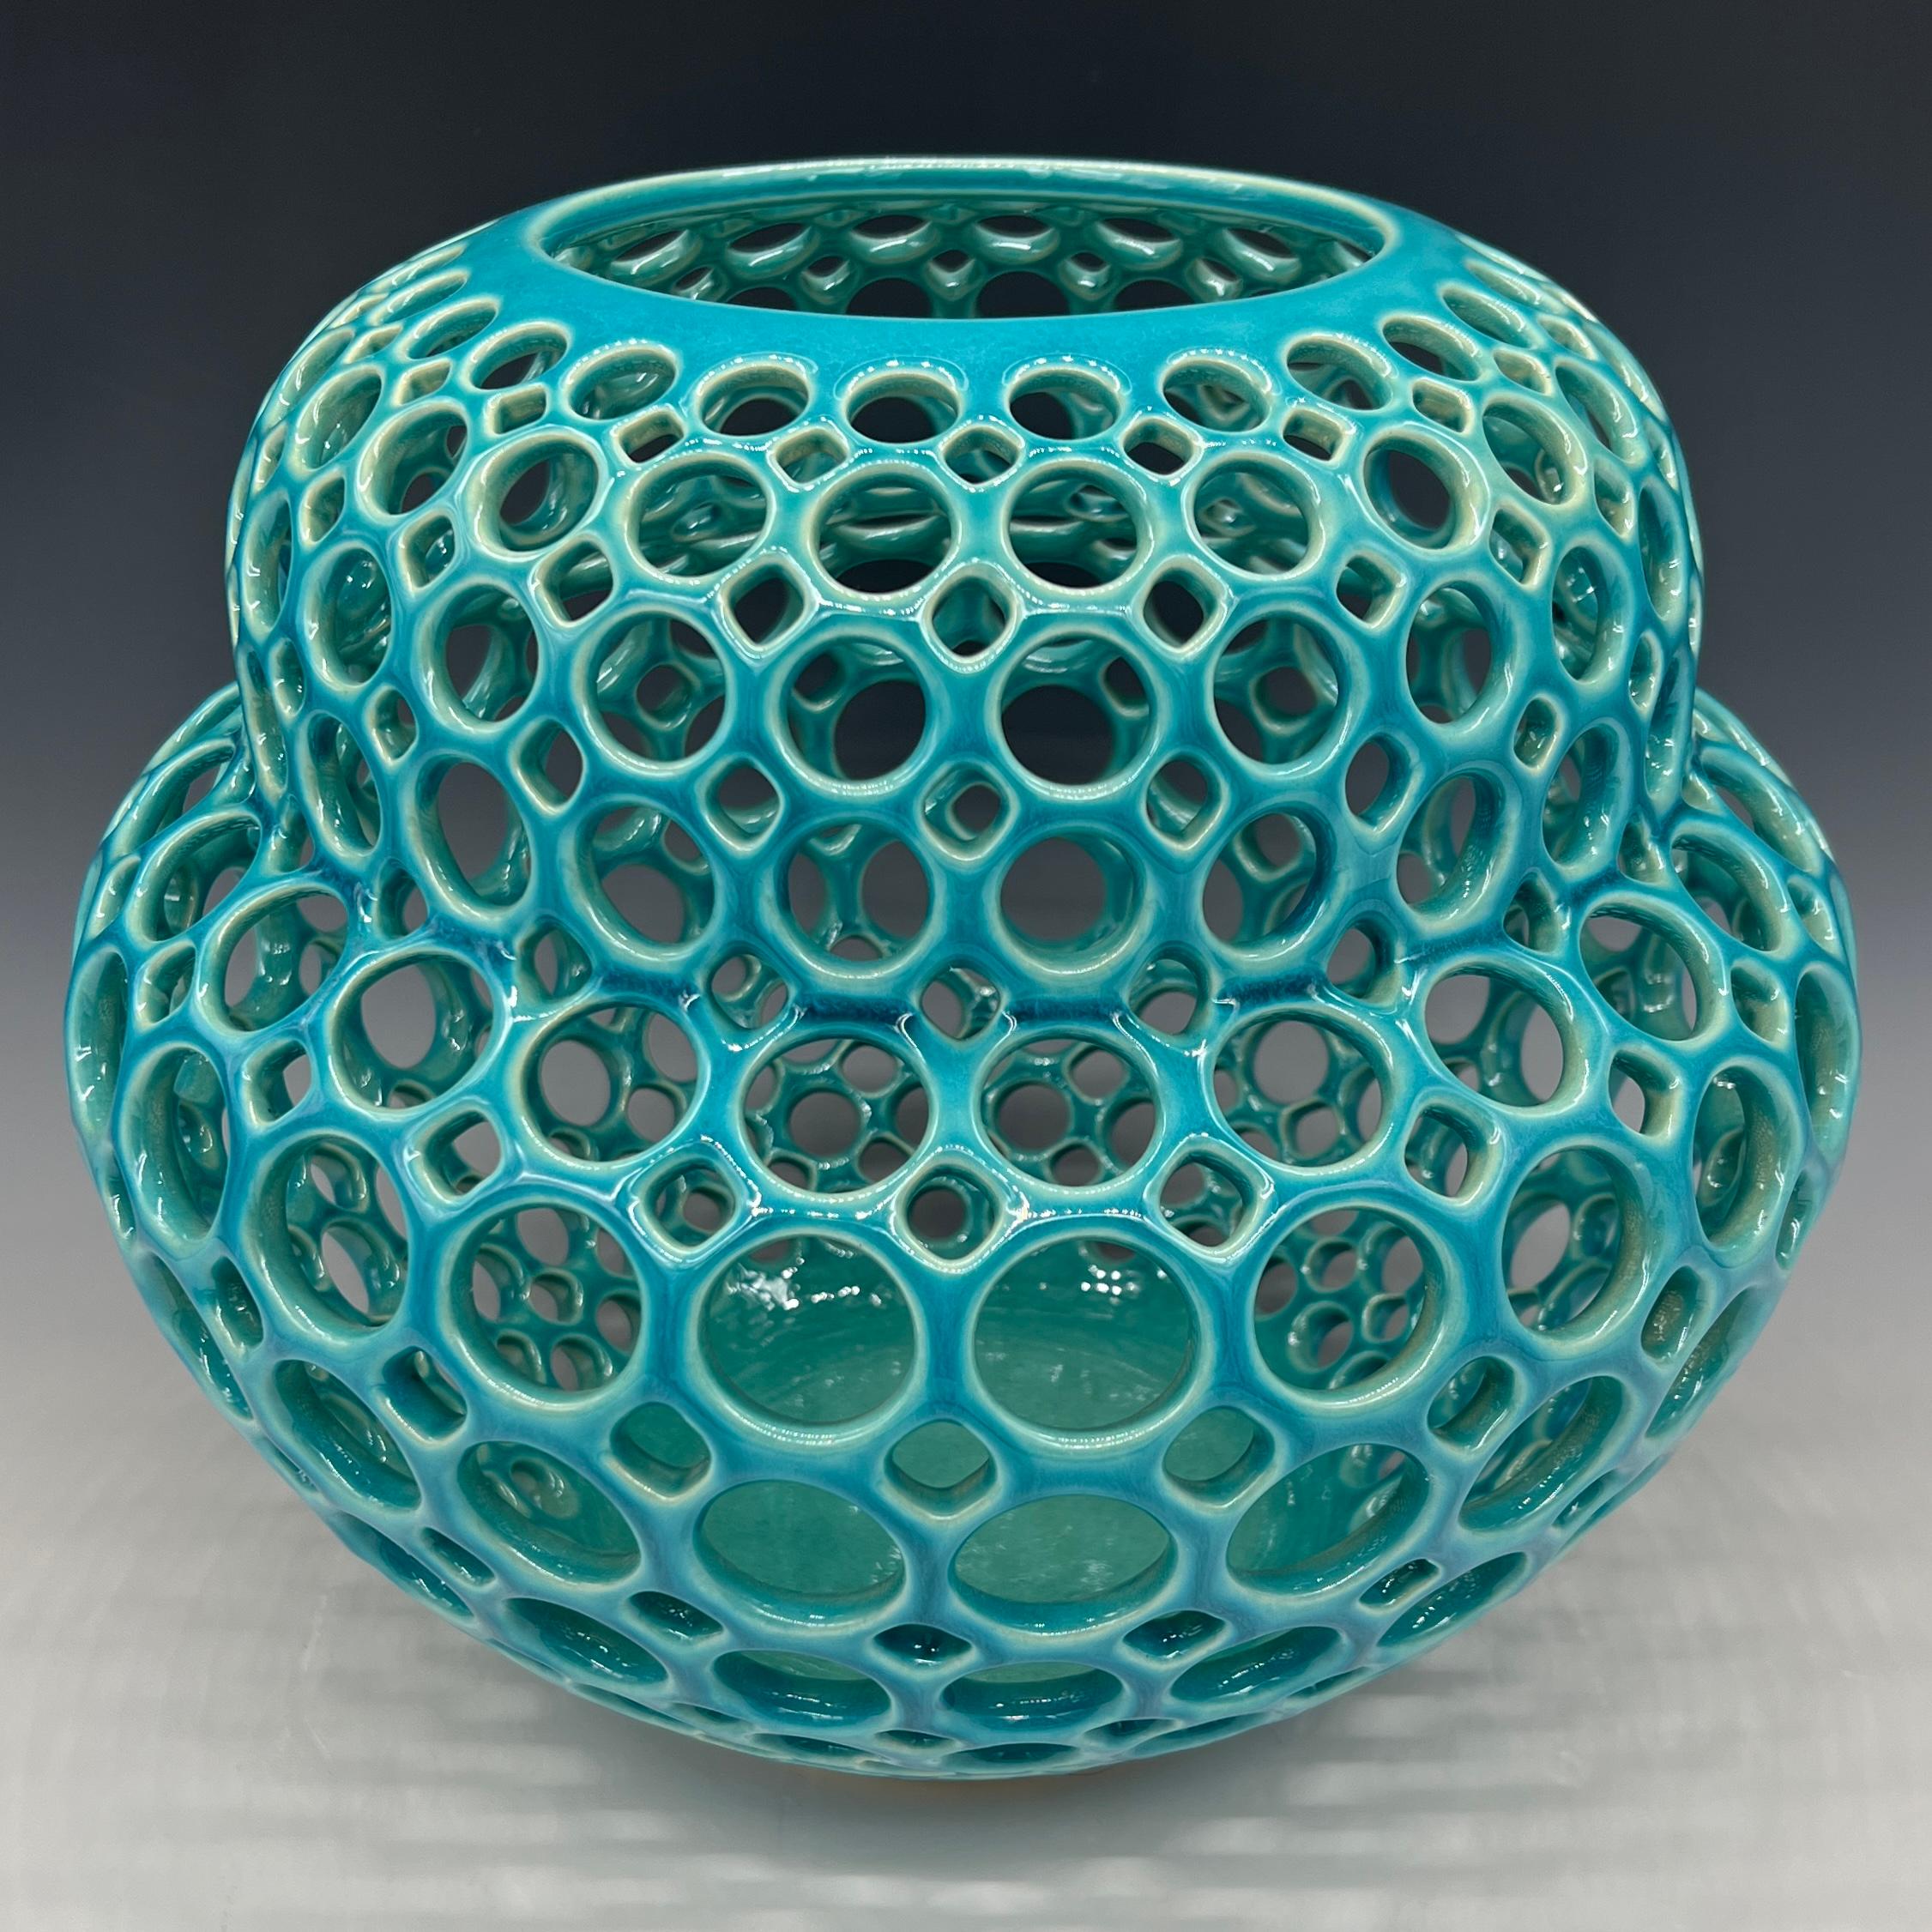 American Aimee-Pierced Ceramic Tabletop Sculpture Turquoise For Sale